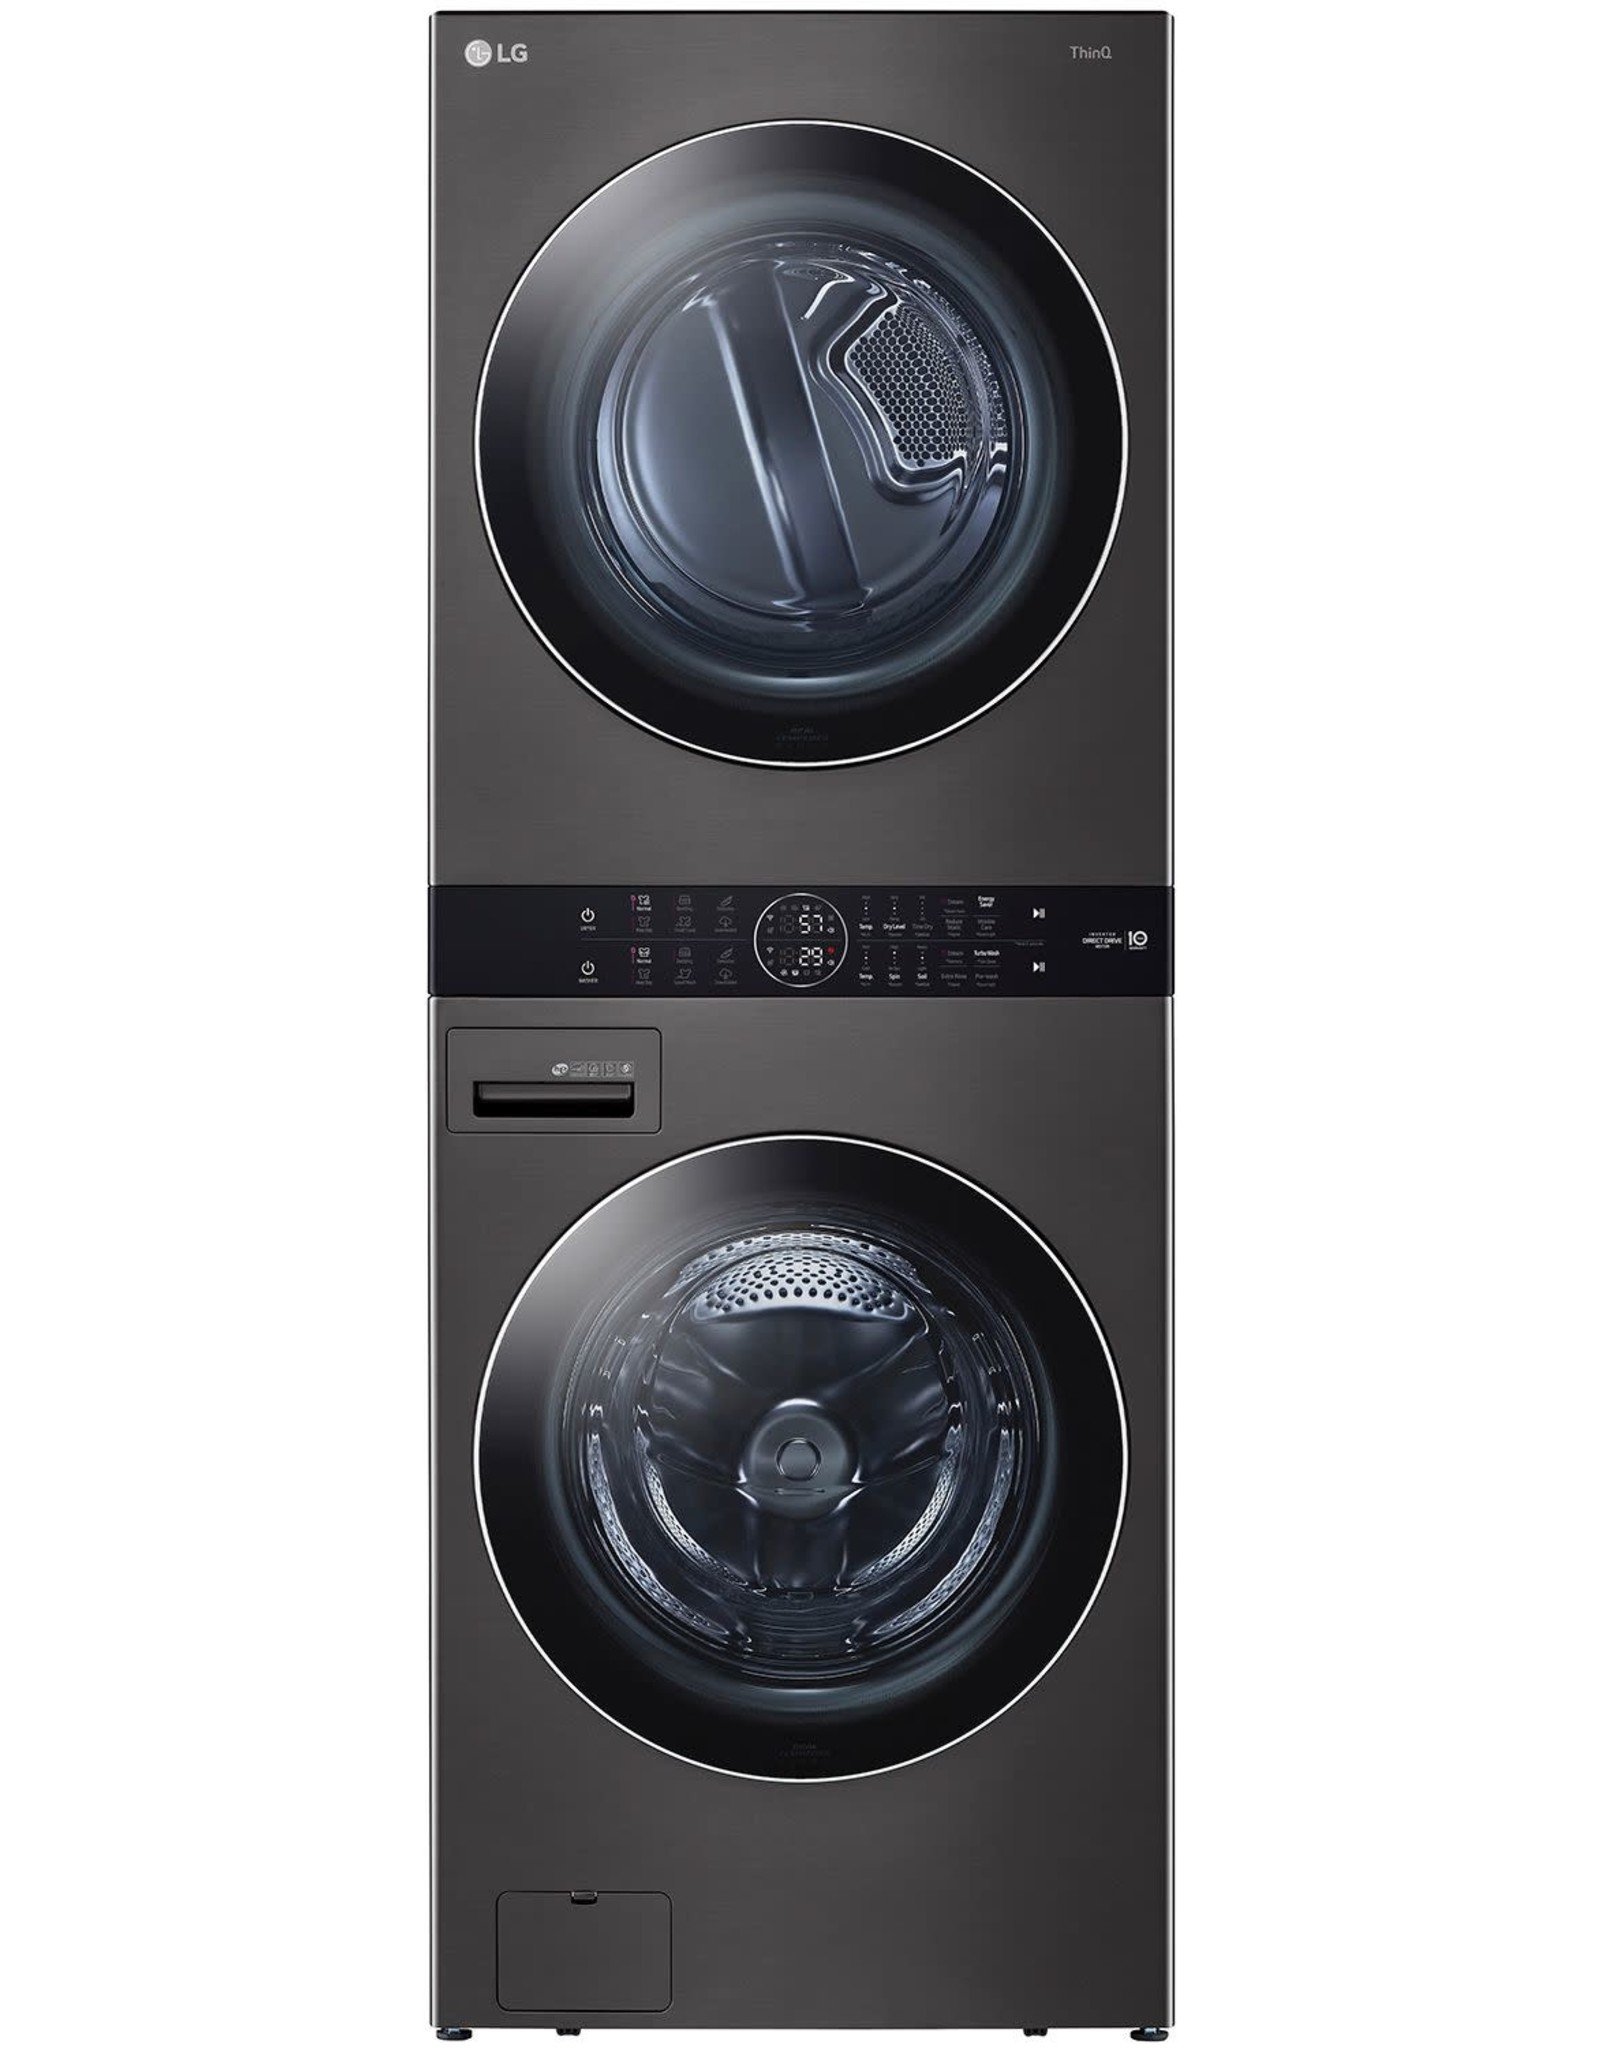 LG Electronics WKGX201HBA 27 in. Black Steel WashTower Laundry Center with 4.5 cu. ft. Front Load Washer and 7.4 cu. ft. Gas Dryer